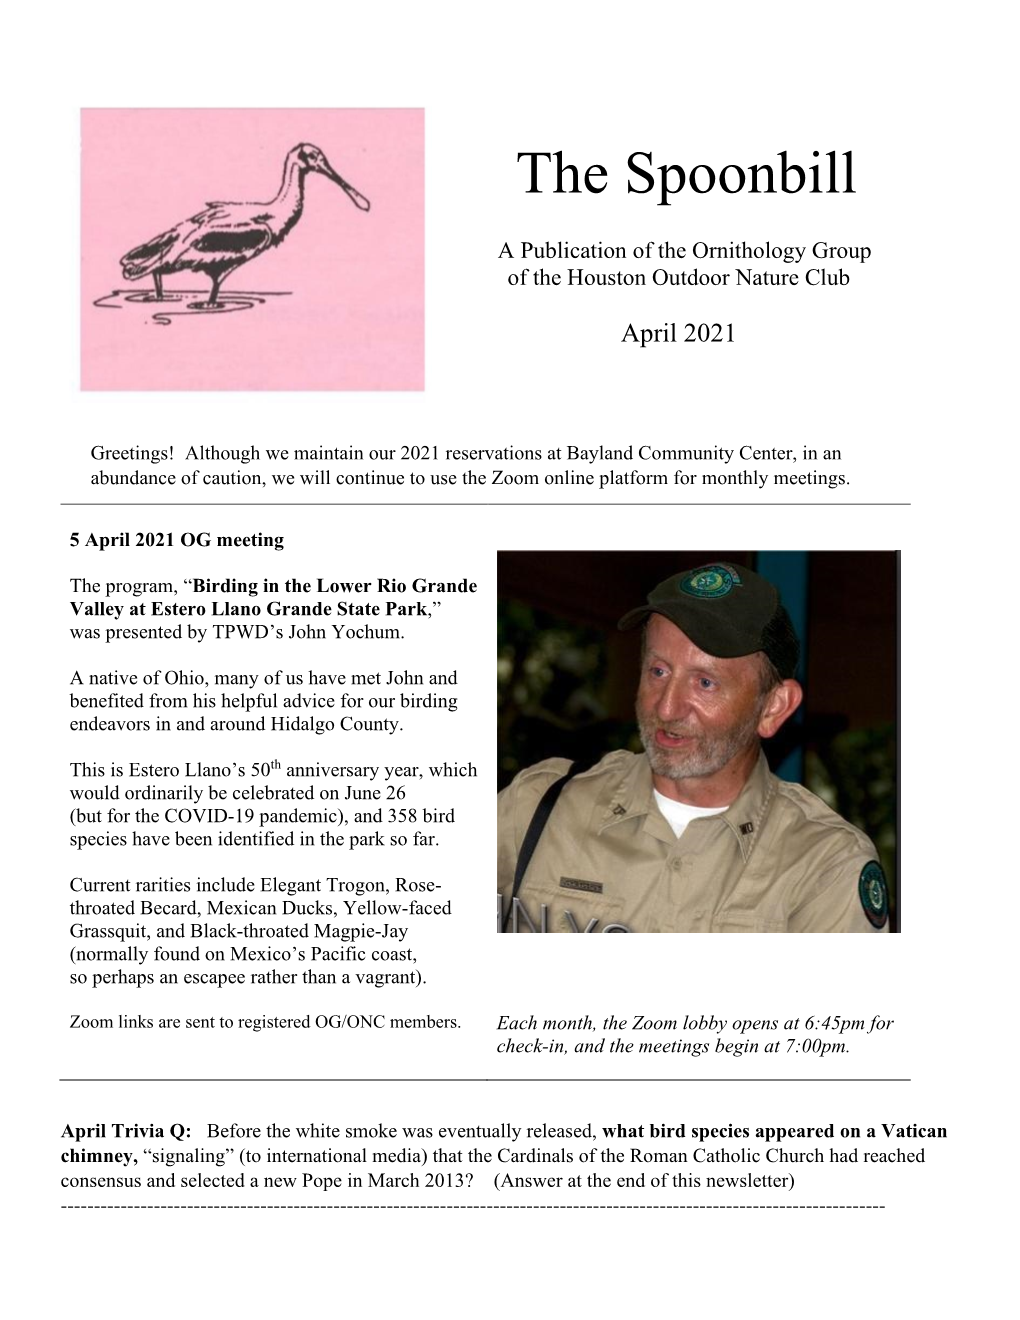 The Spoonbill Newsletter, April 2021